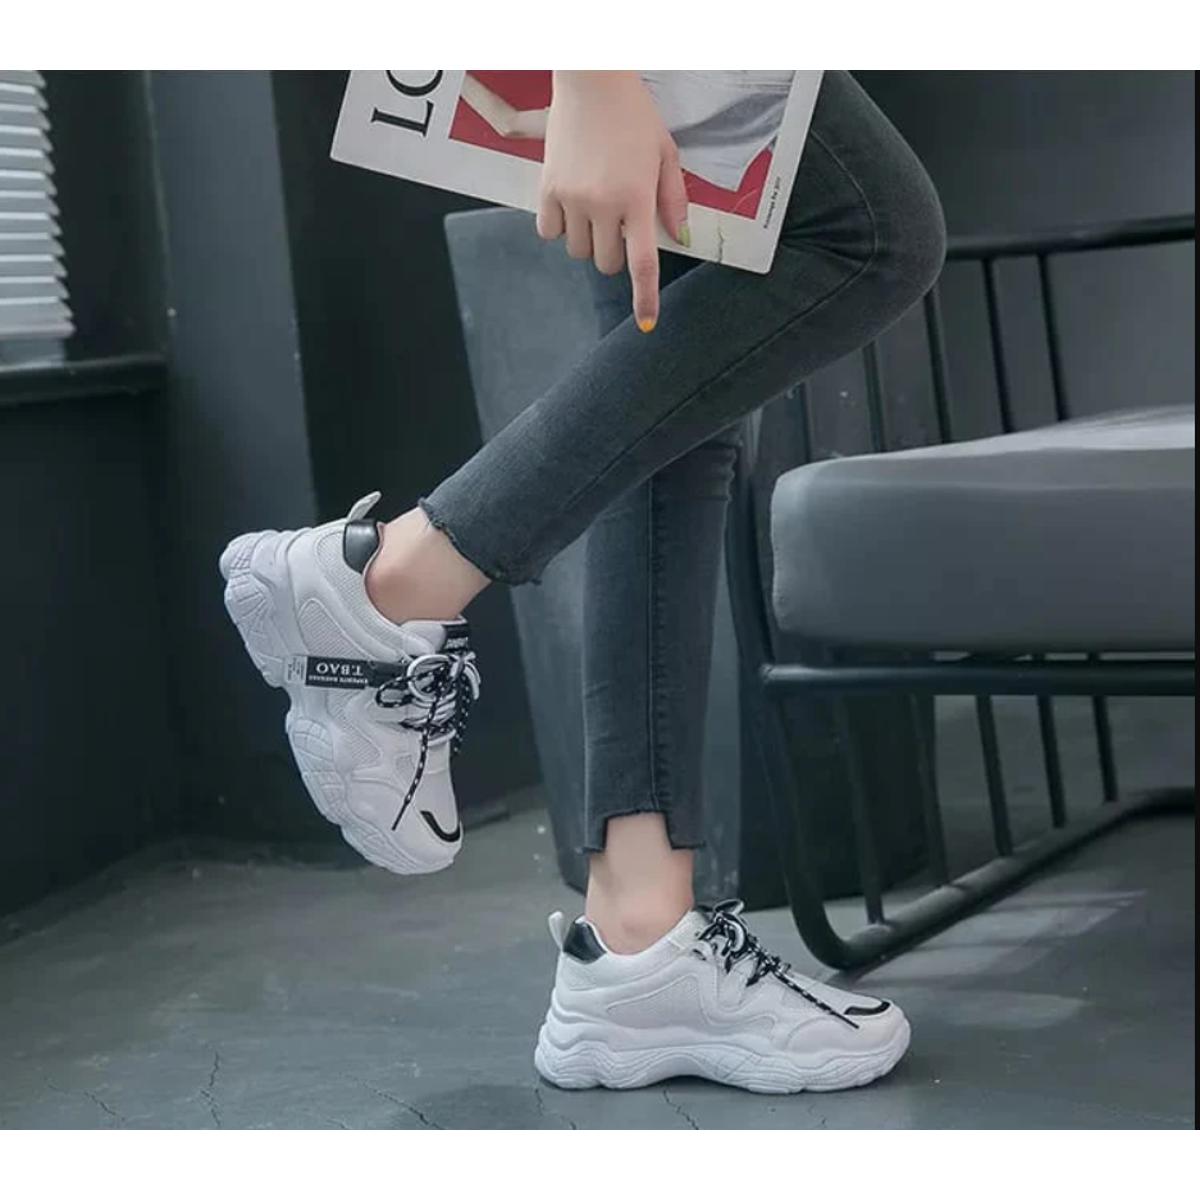 joggers for women, joggers for women high sole stylish, shoes for